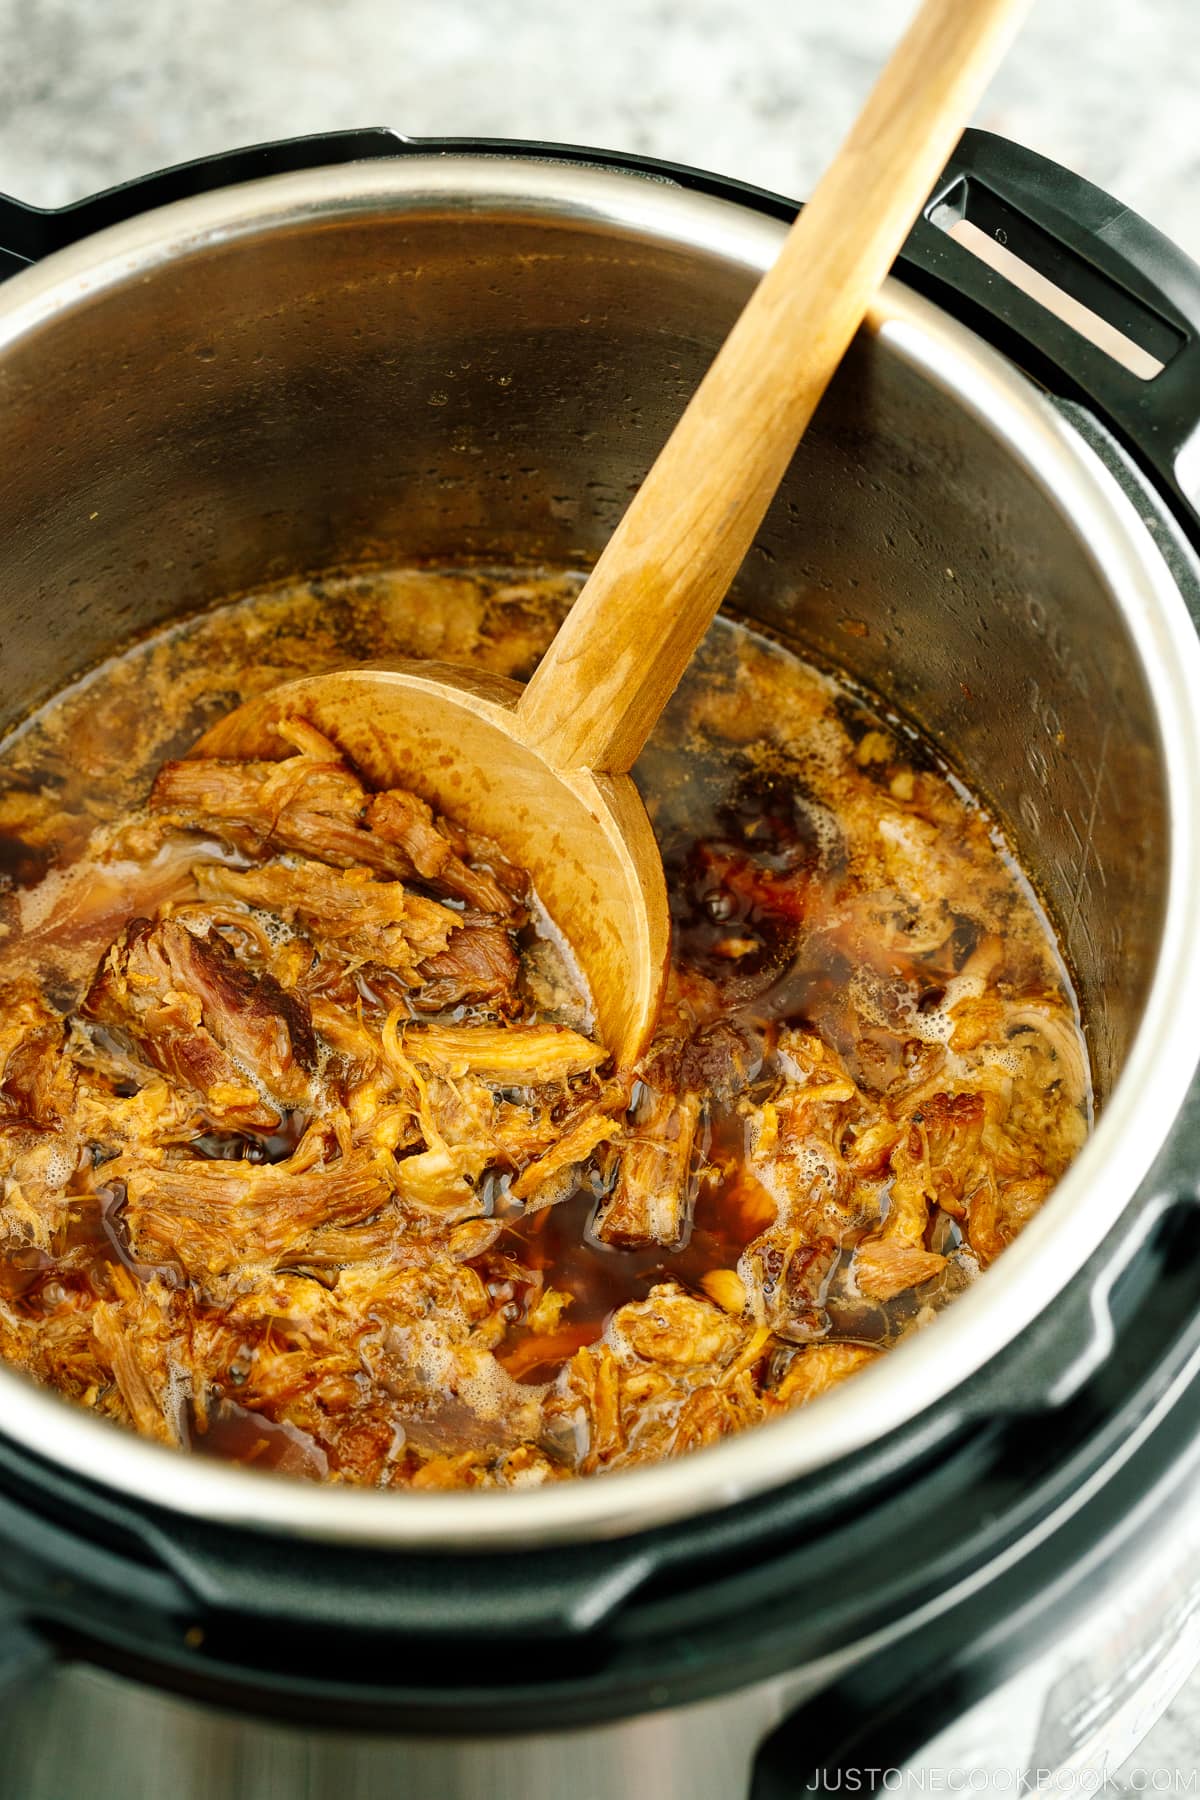 The Instant Pot containing juicy and fall-apart tender pulled pork.